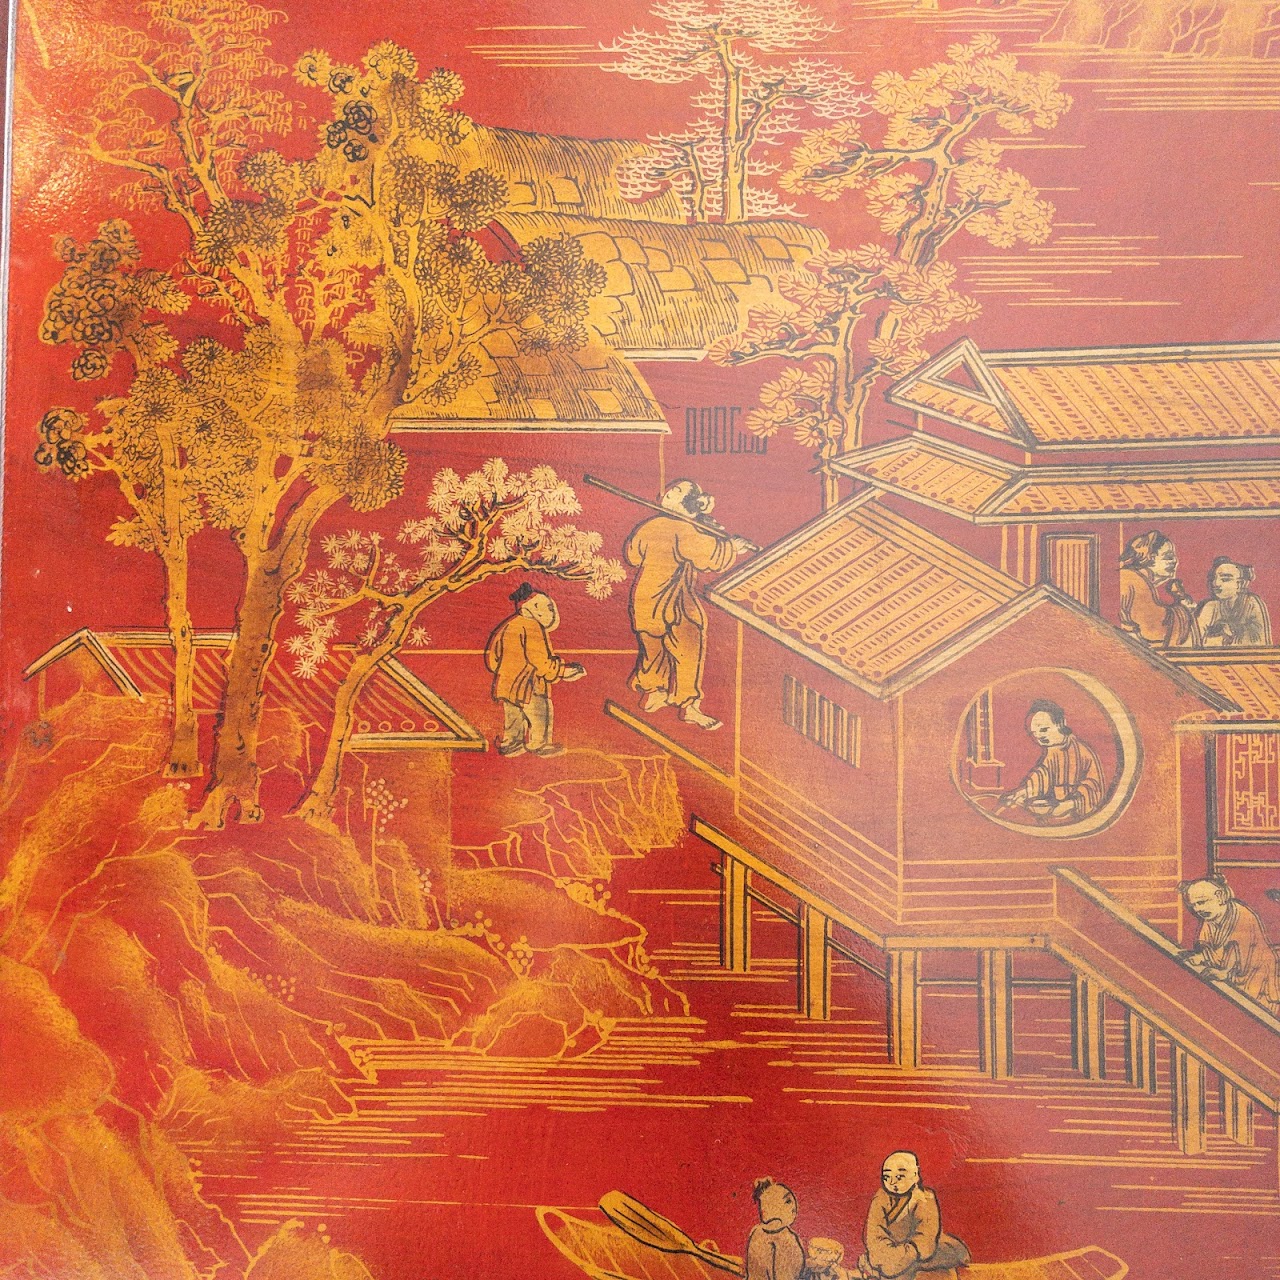 Chinese Lacquer & Gilt Six-Panel Folding Screen